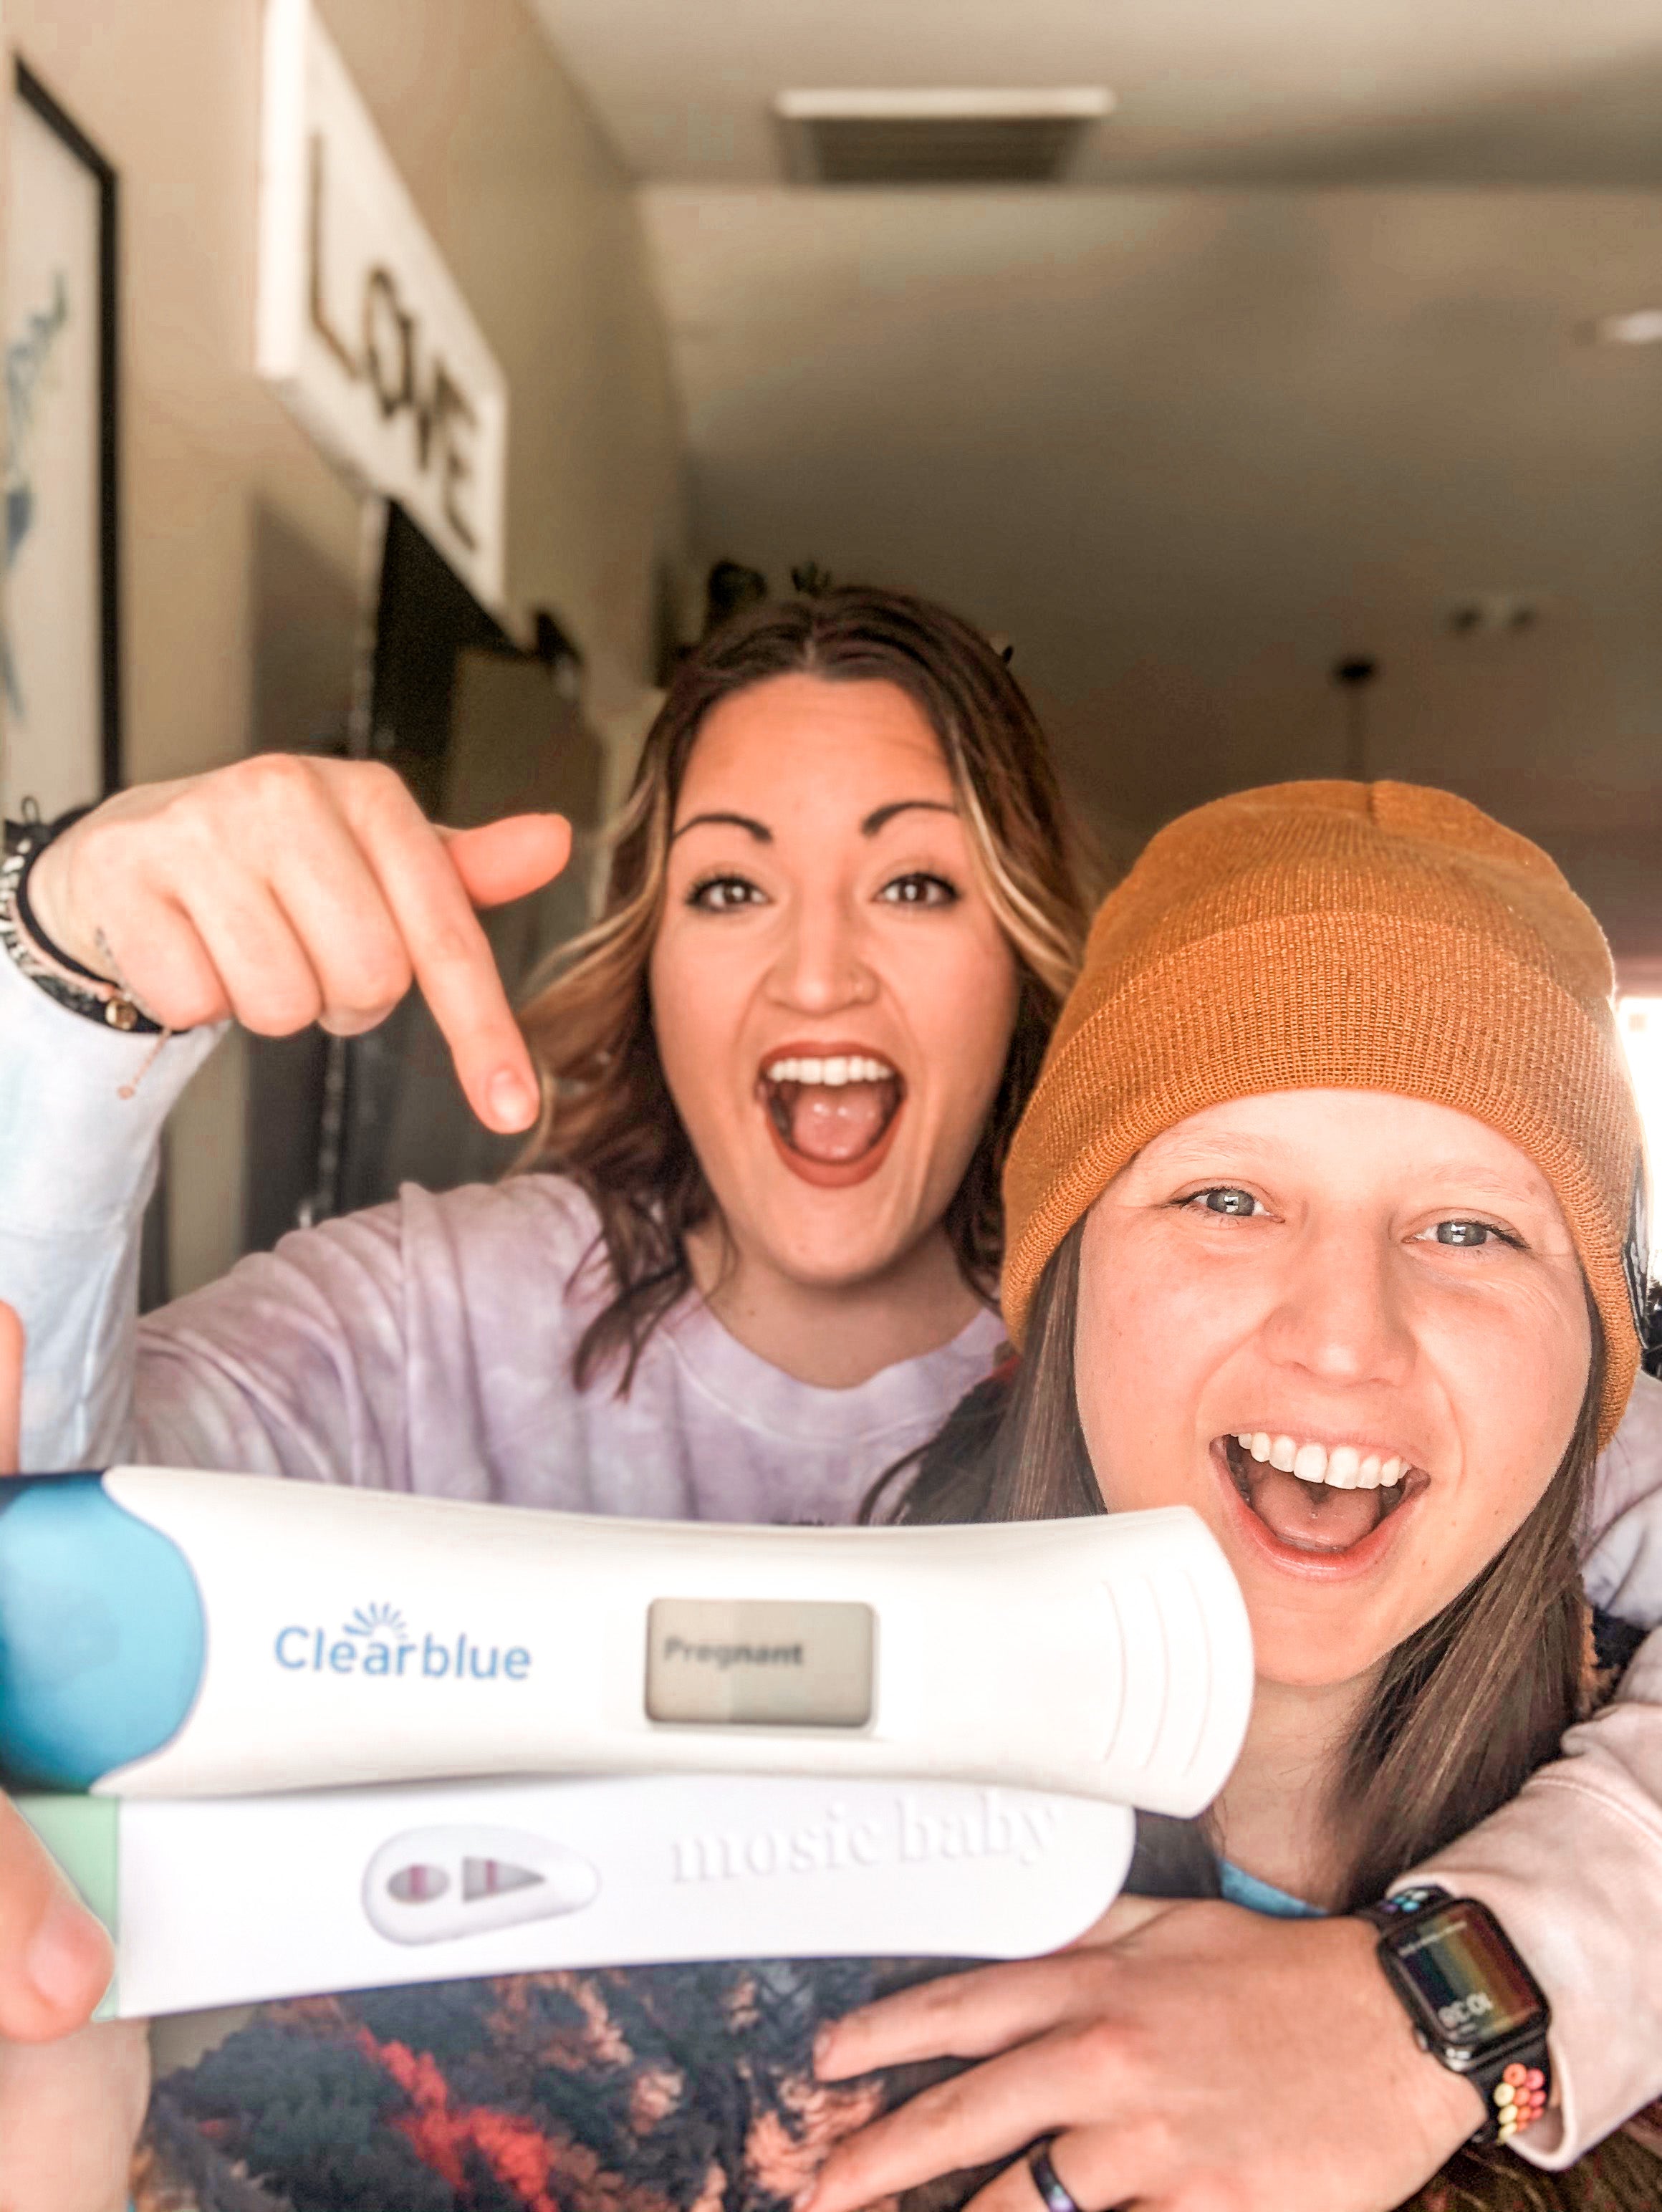 Mama's-to-be hold up two positive pregnancy tests, with wife on the left pointing and smiling to the tests as the wife on the right holds them.